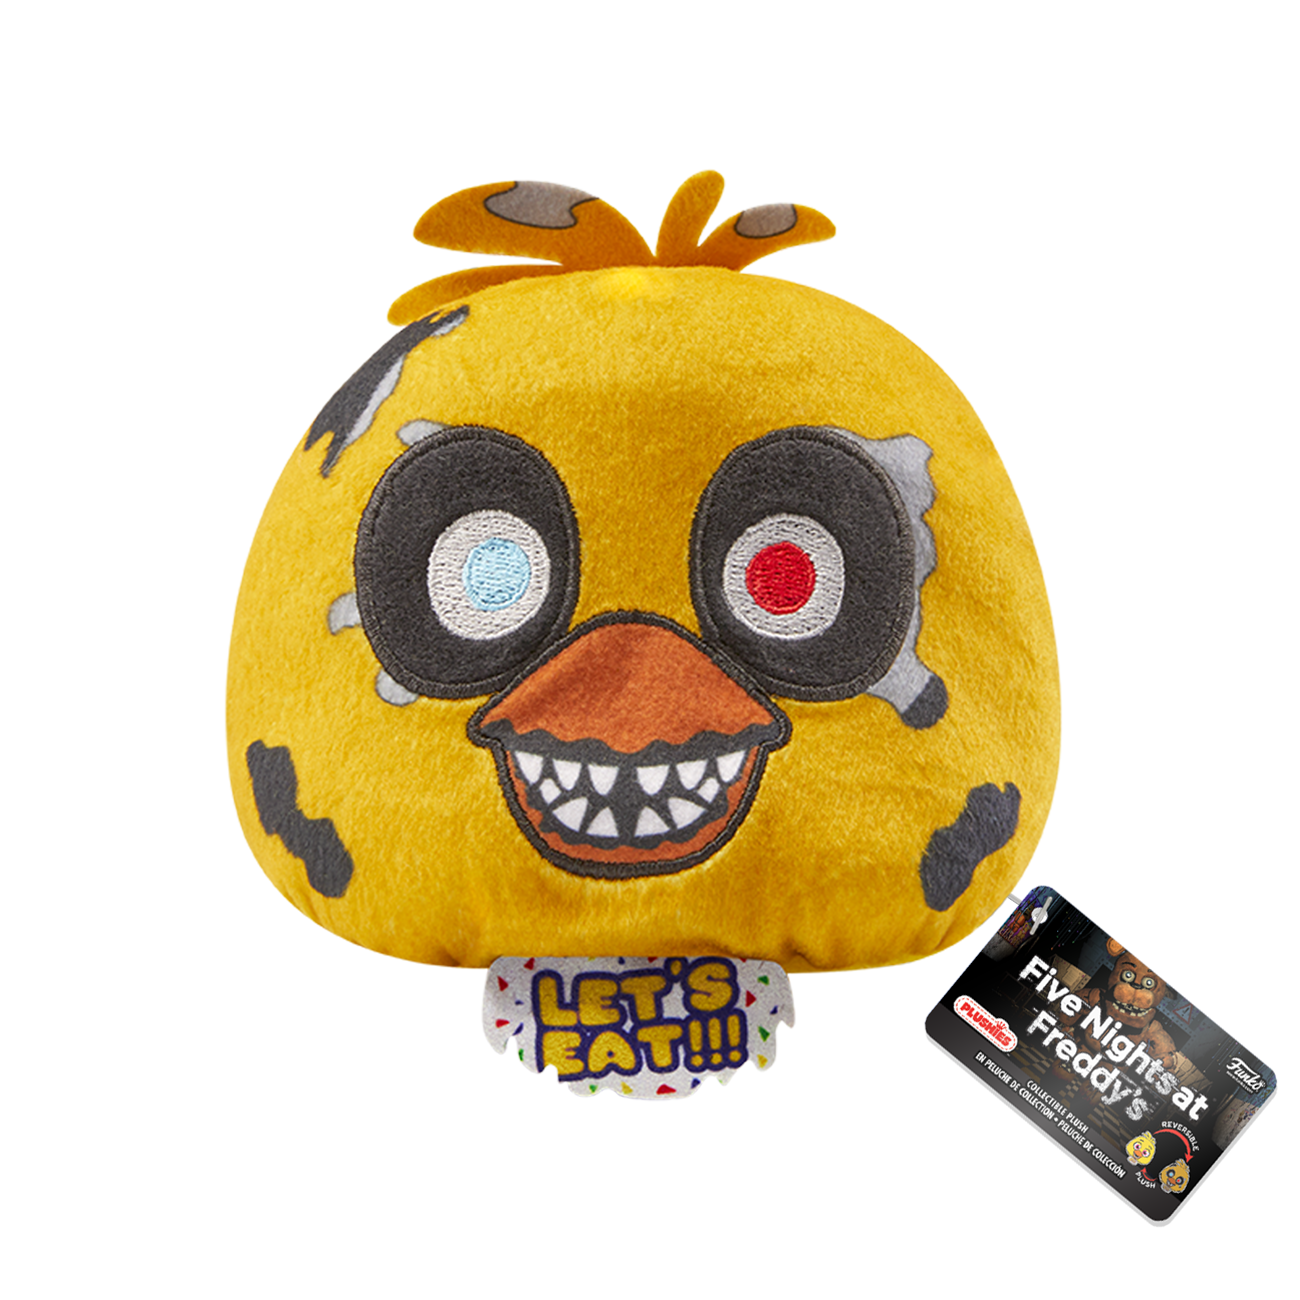 Funko Reversible Heads Plush - Five Nights at Freddy's - Chica (4 inch)